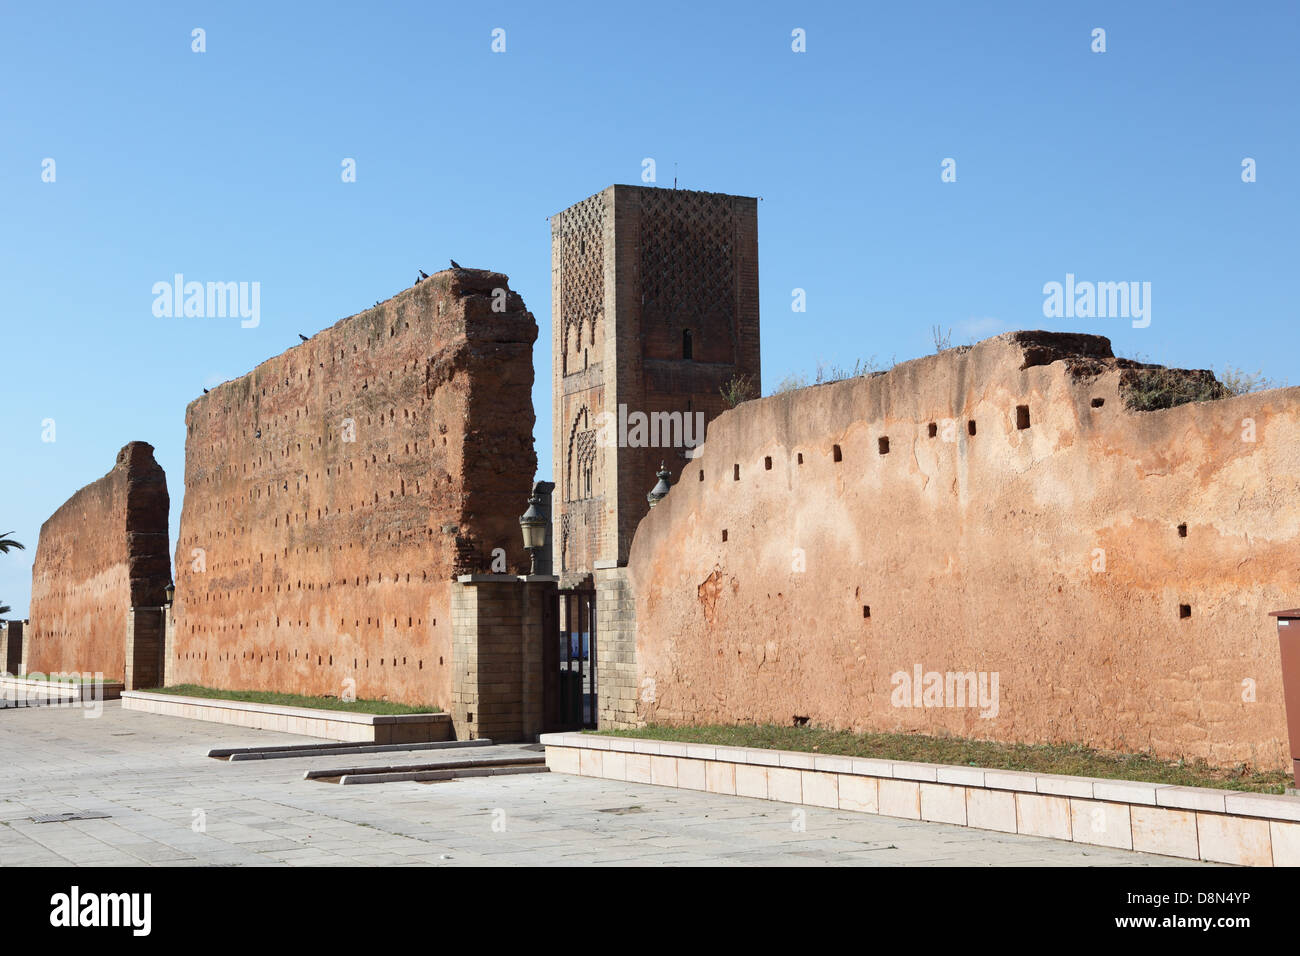 The Hassan Tower in Rabat, Morocco Stock Photo